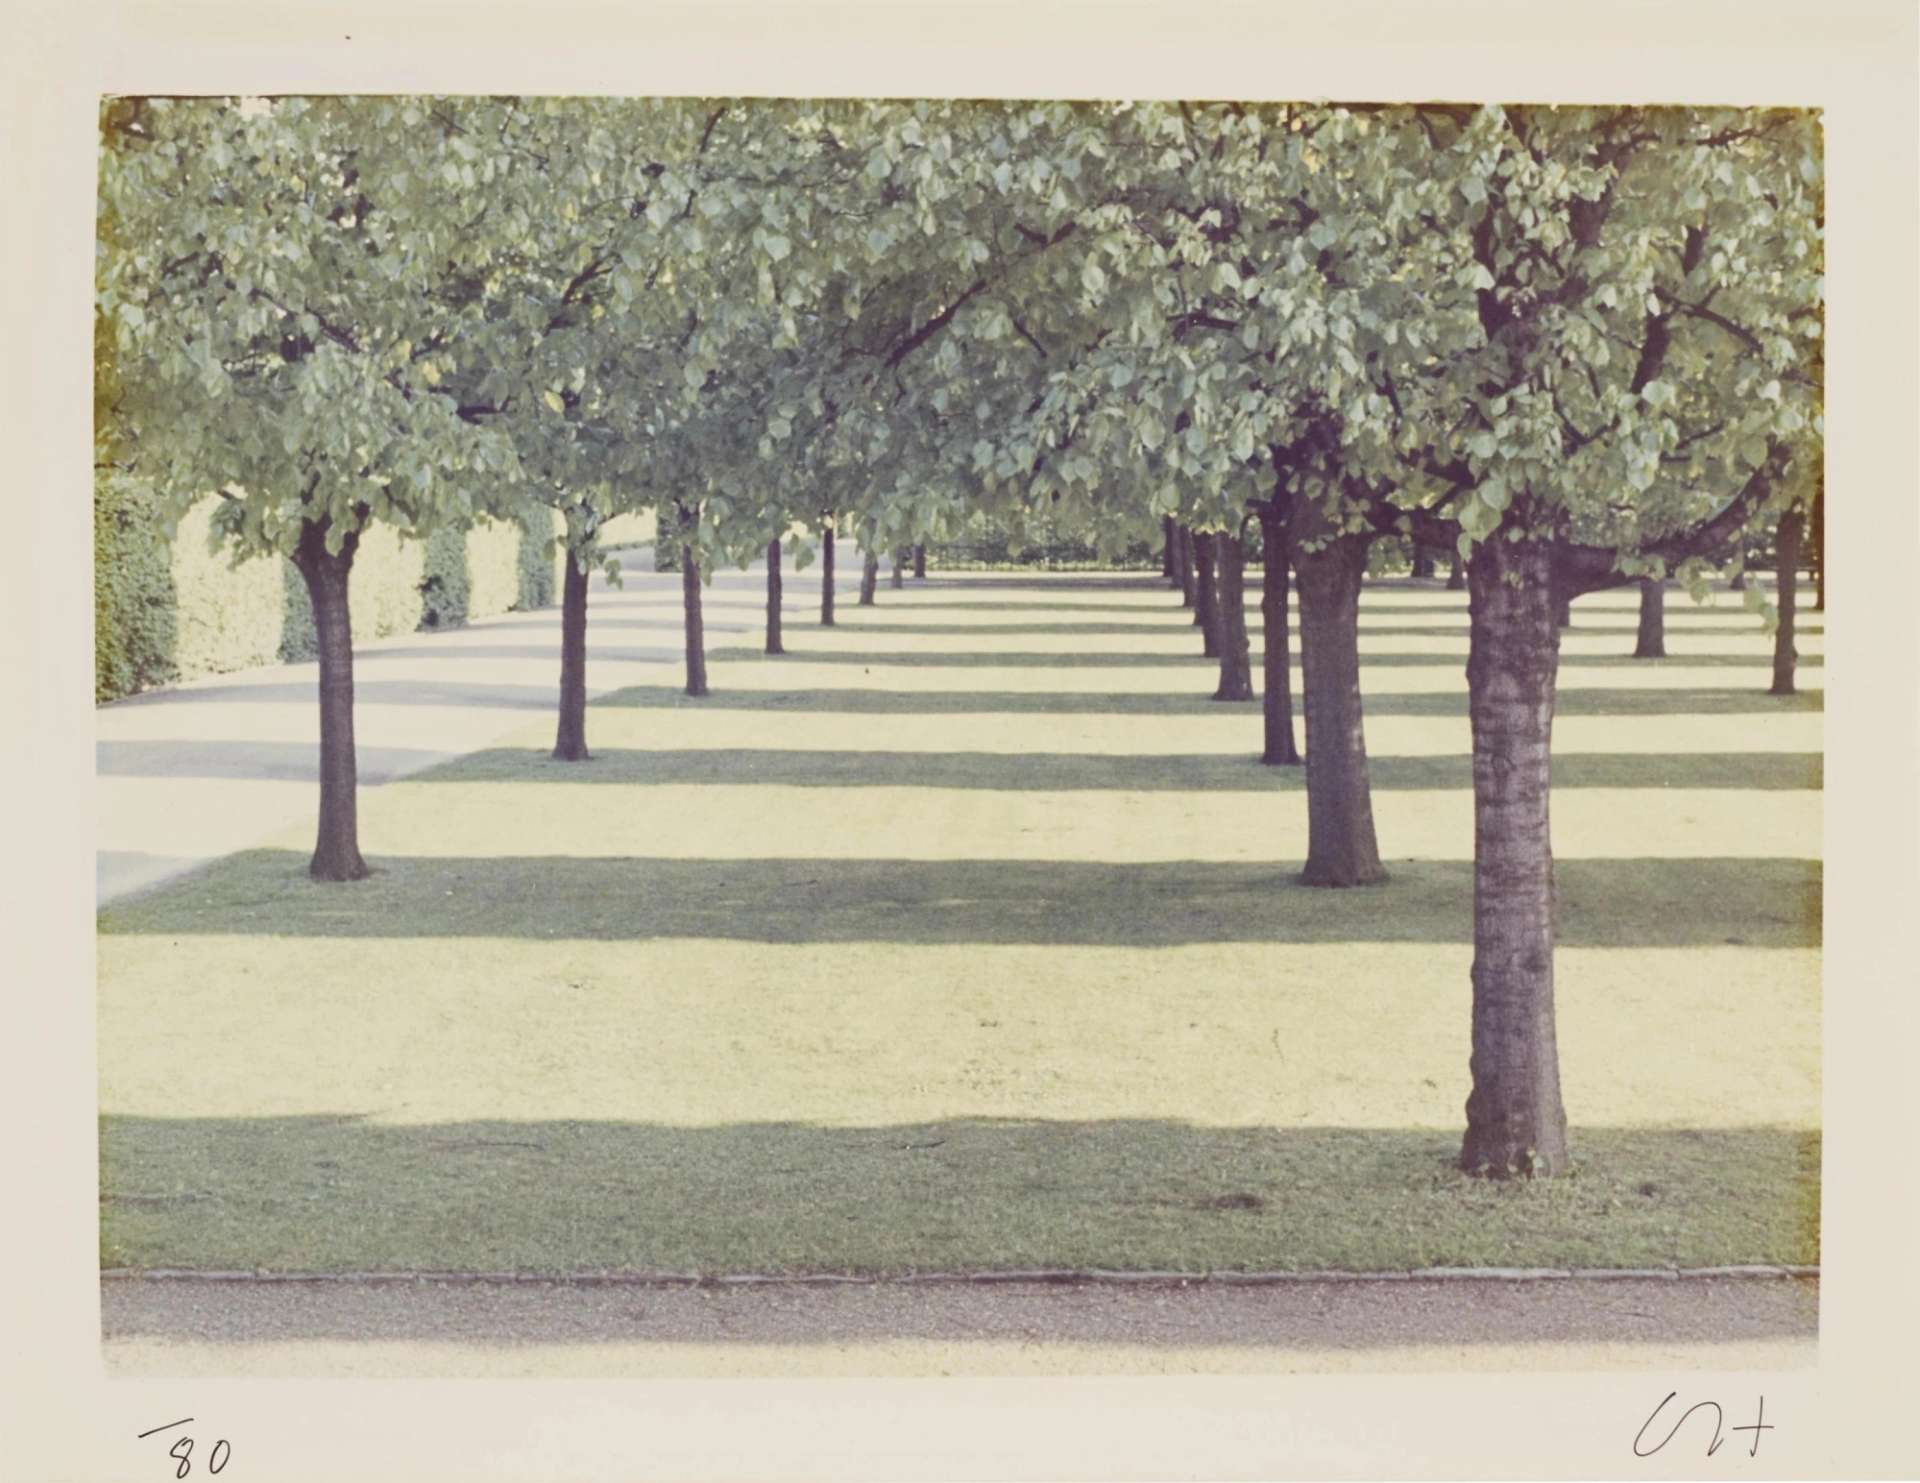 This photograph by artist David Hockney shows a wooded park in the sunshine.